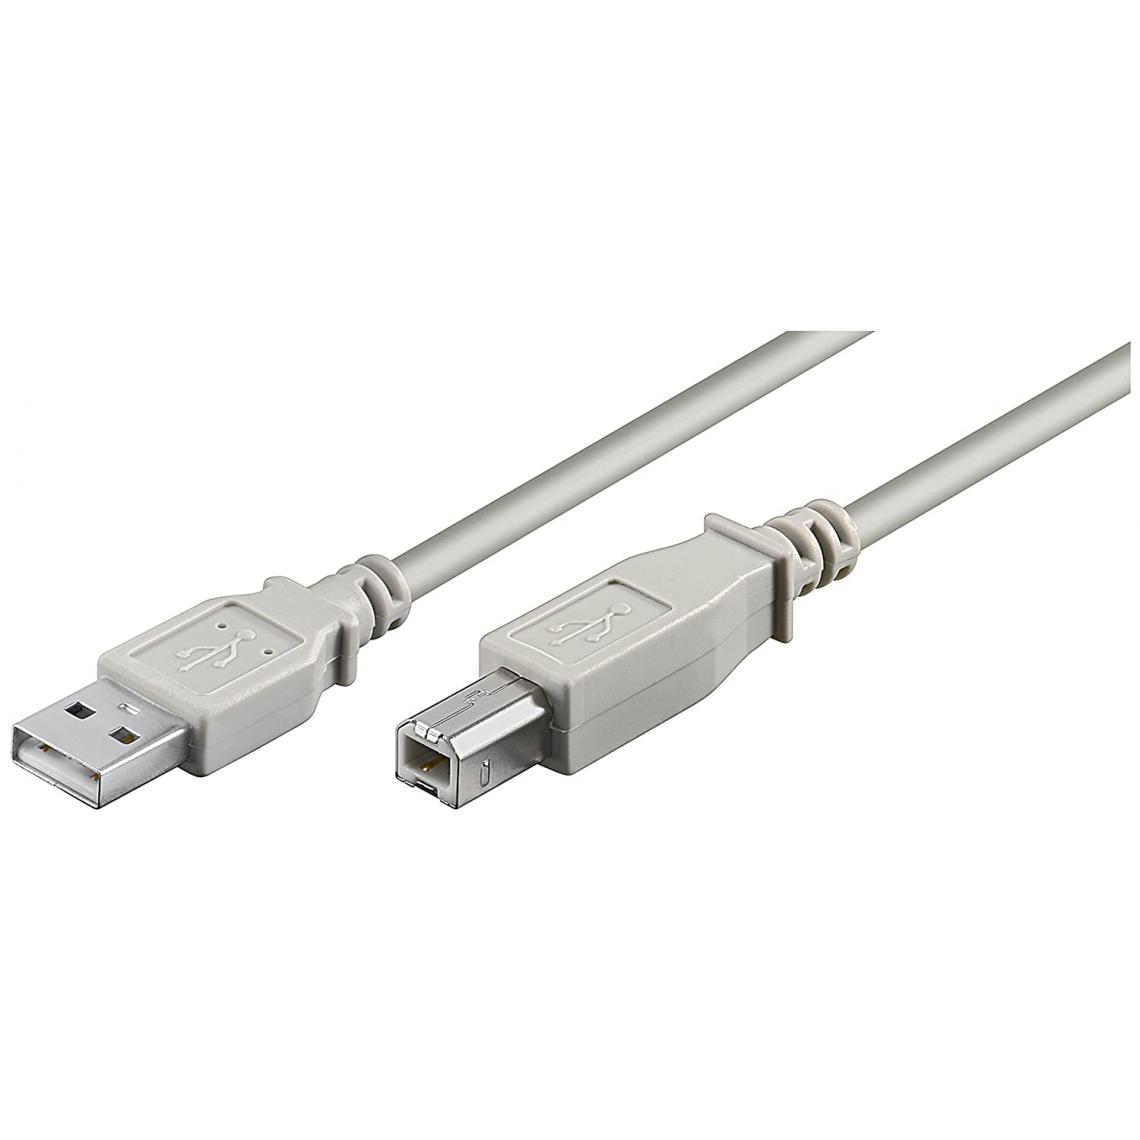 Ineck - INECK - Cable USB A vers B 5 m - Cable Imprimante USB A-B - M/M - - Câble antenne